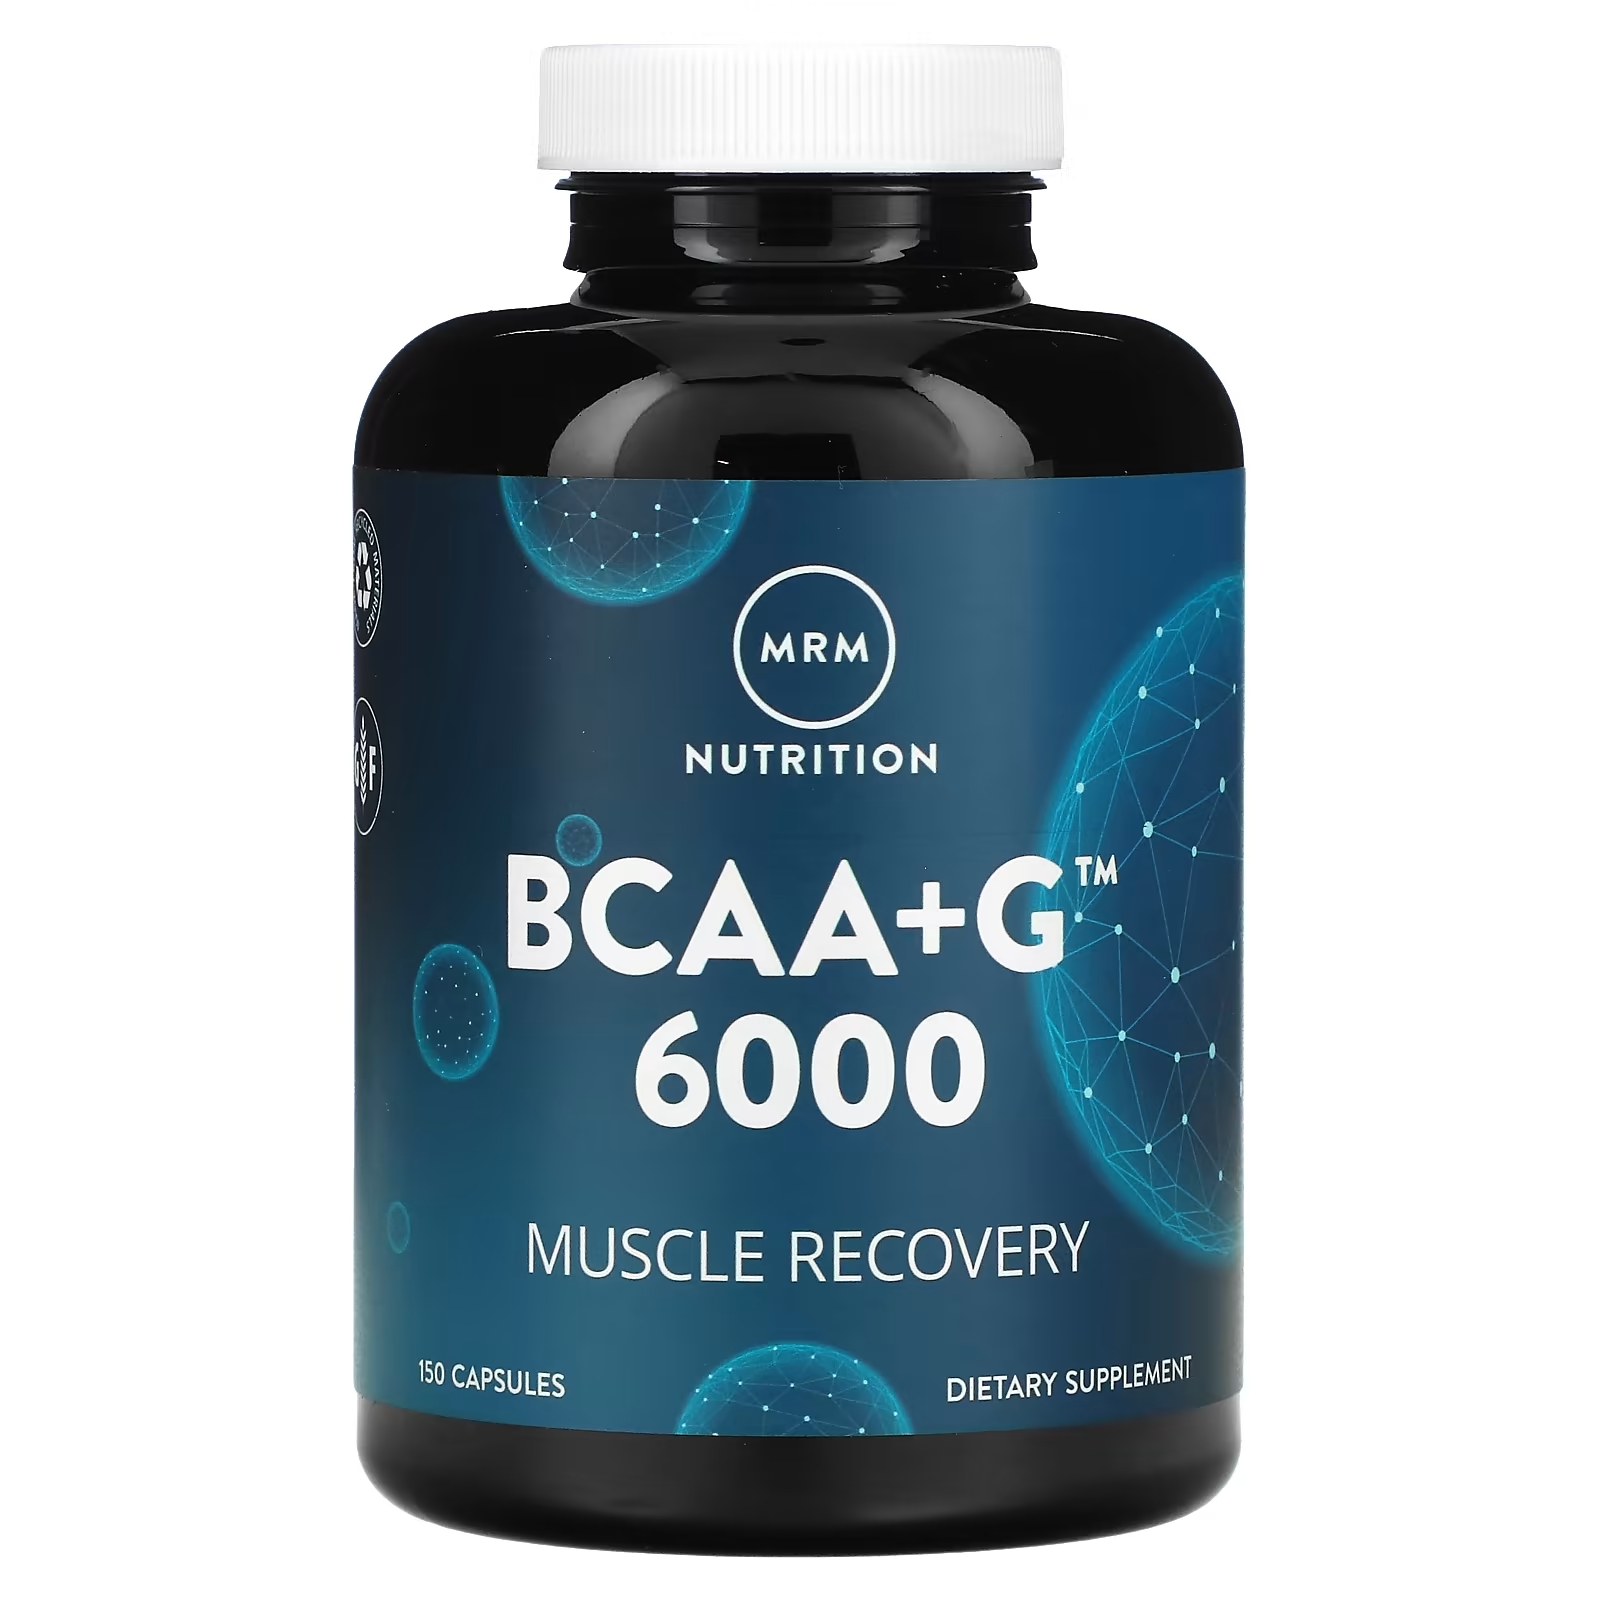 MRM Nutrition Nutrition BCAA и G 6000, 150 капсул